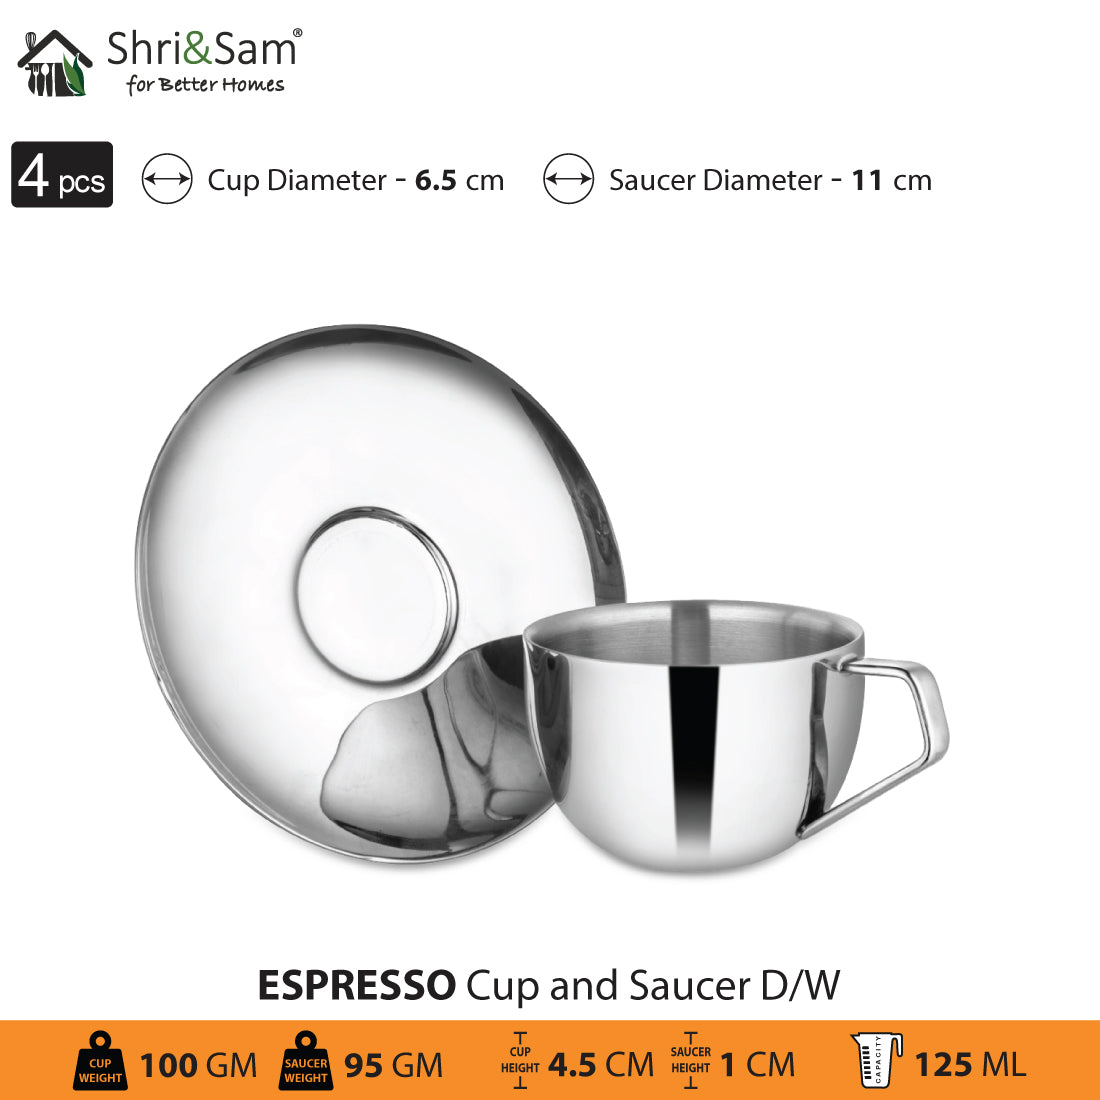 Stainless Steel 4 PCS Double Wall Cup and Saucer Espresso